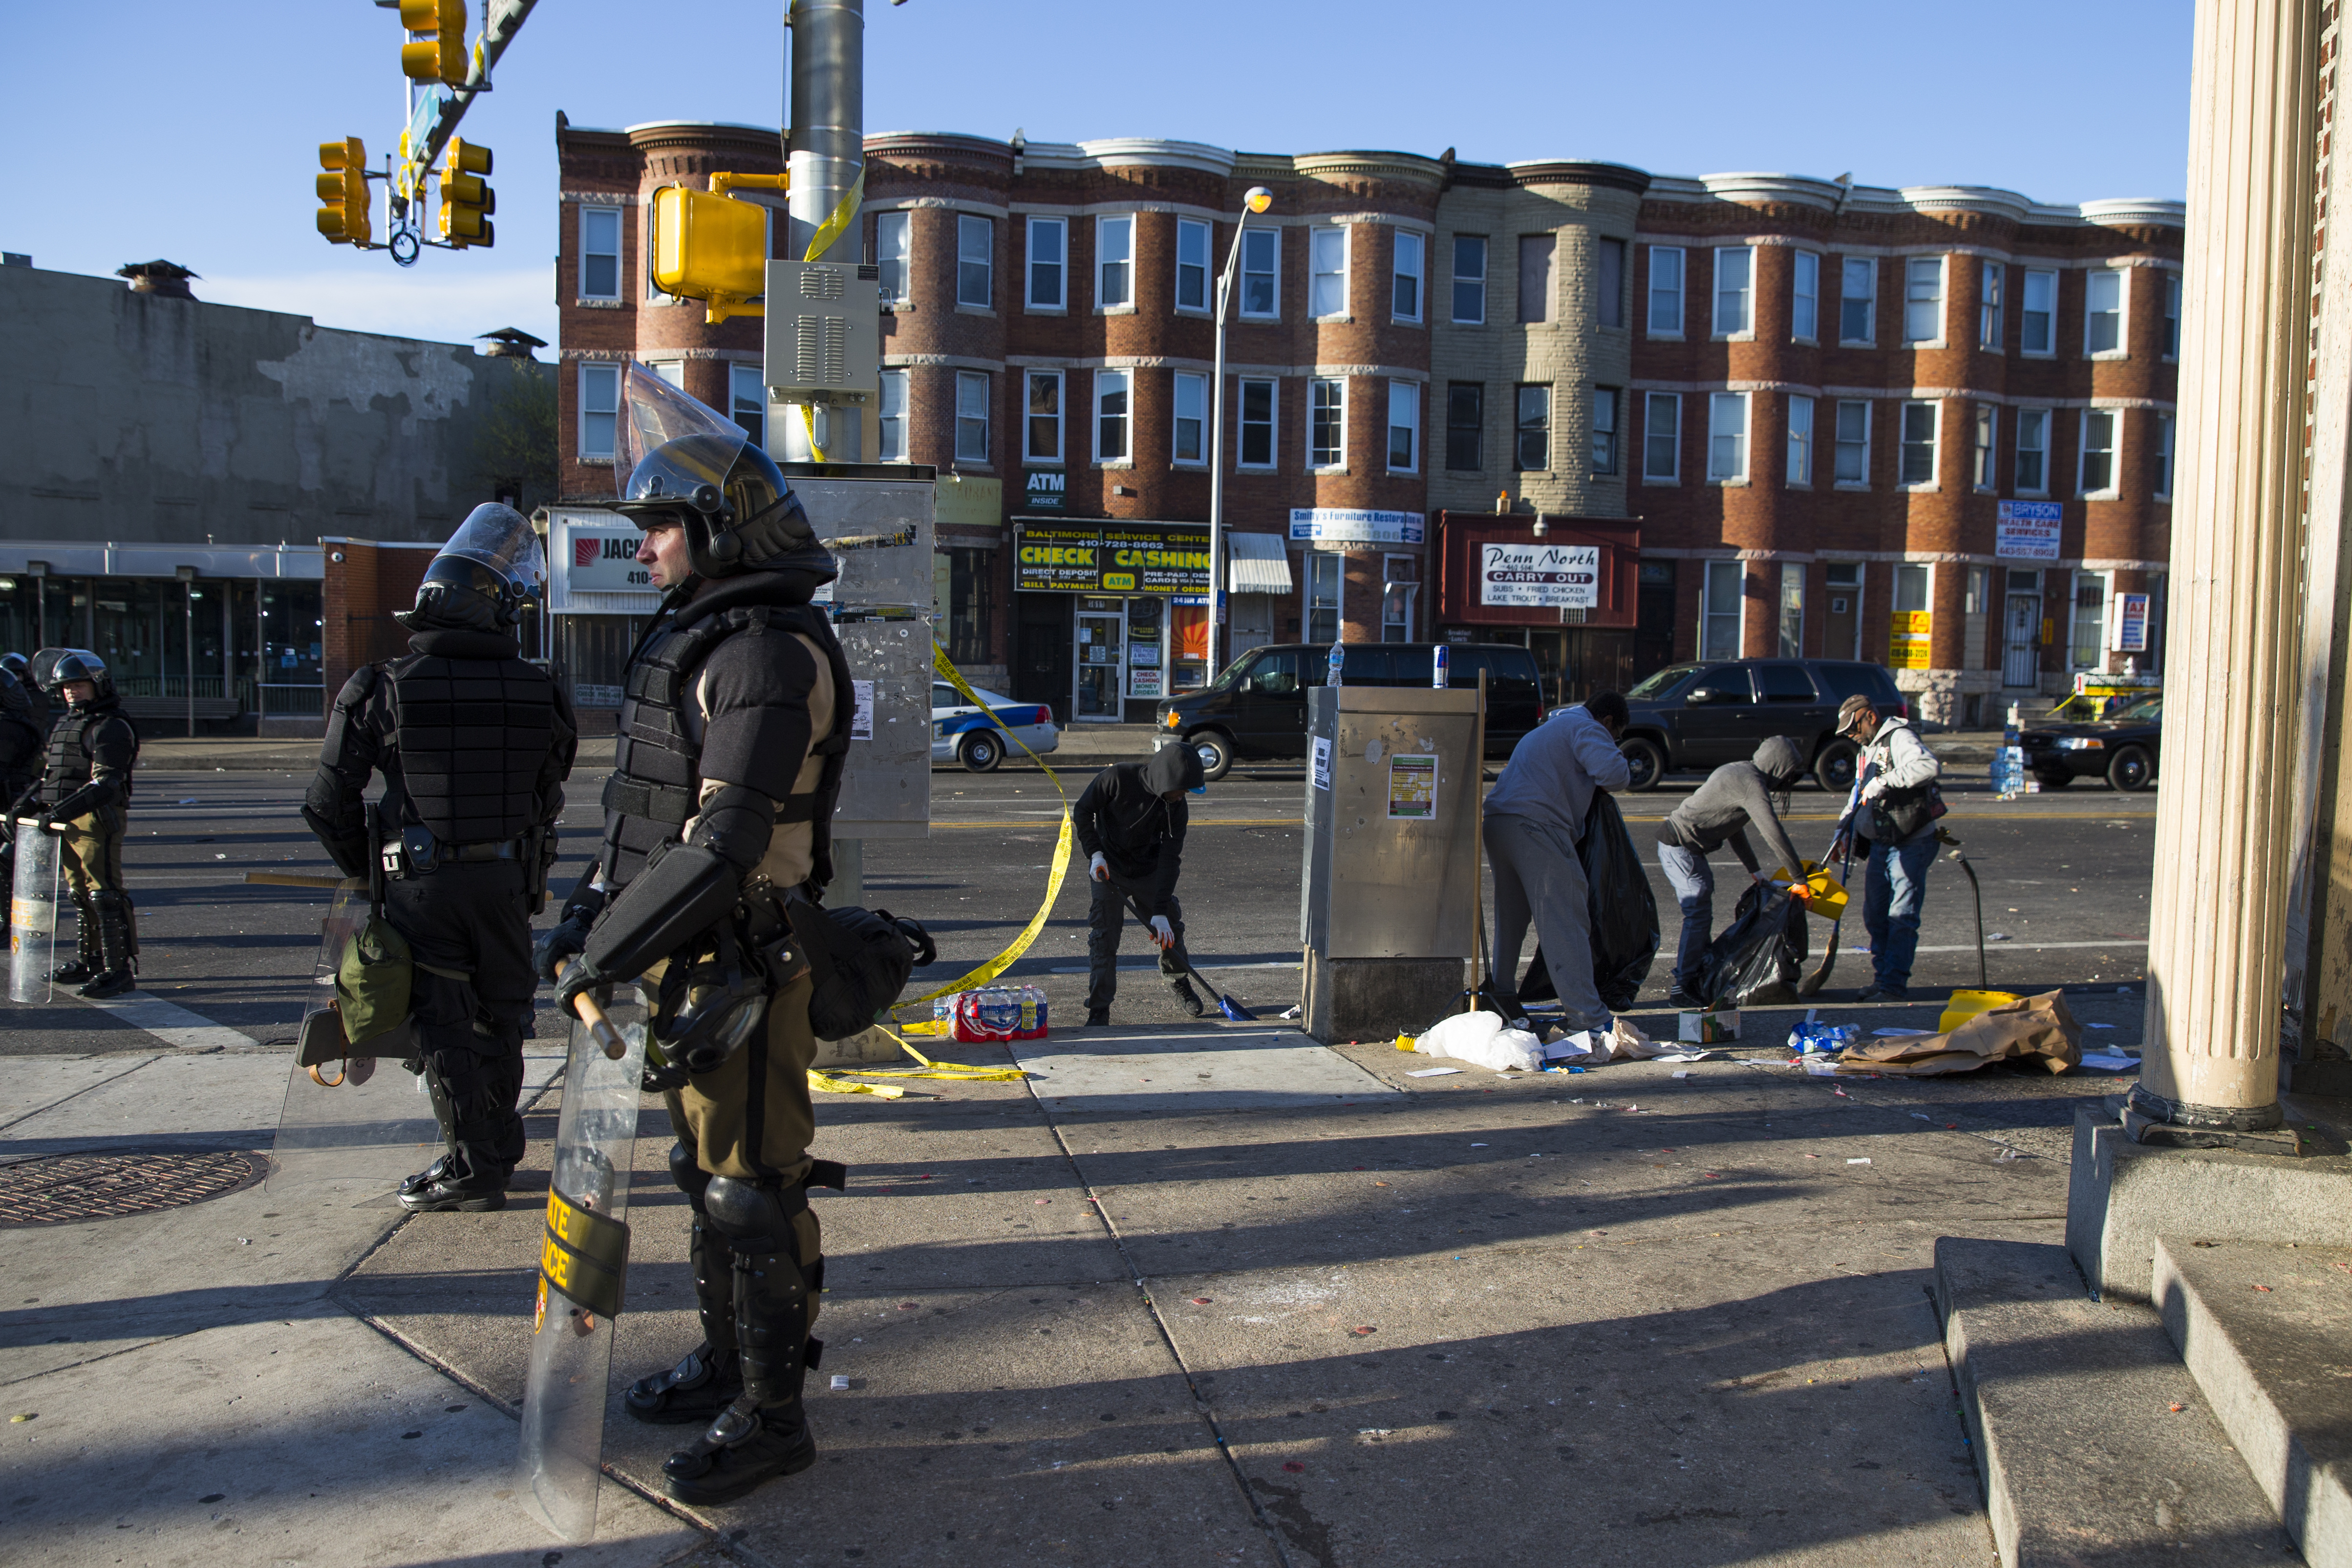 Maryland state troopers stand guard, Tuesday, April 28, 2015, as residents clean up after an evening of riots following the funeral of Freddie Gray on Monday, in Baltimore. (AP Photo/Evan Vucci)